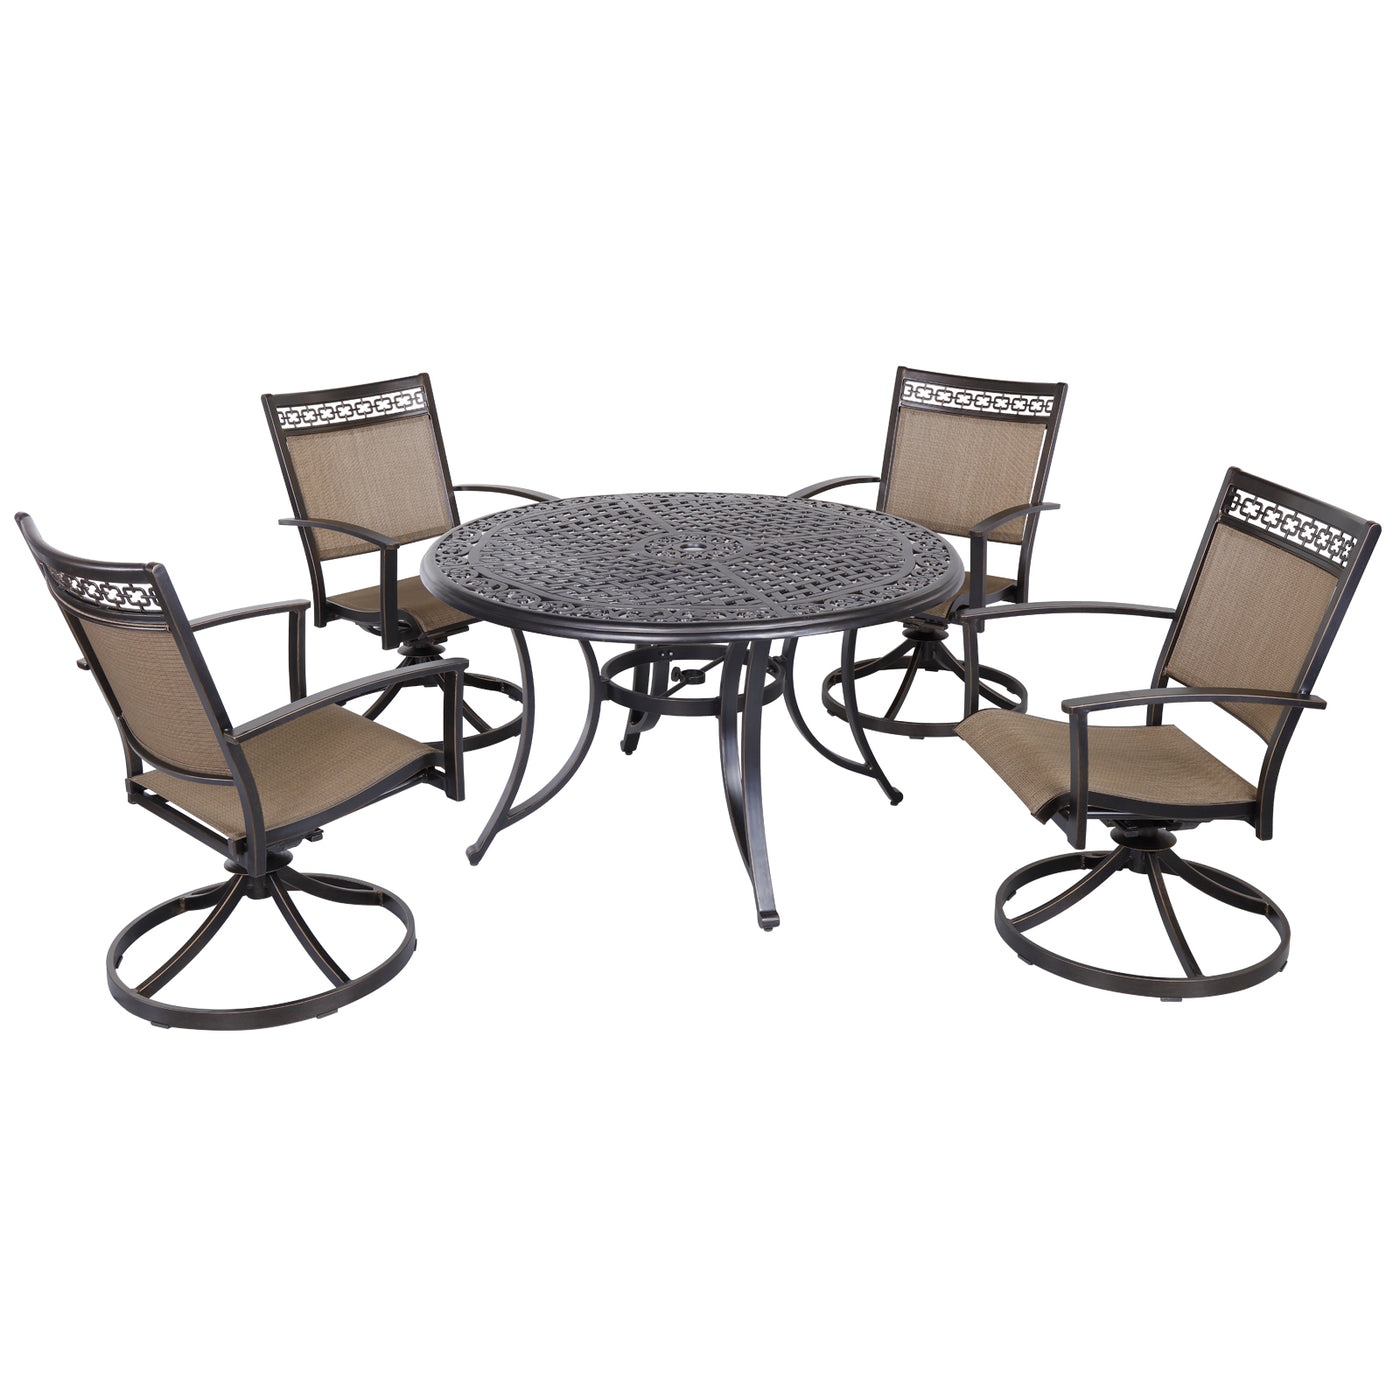 Set of 5 Patio 48" Round Cast Aluminum Dining Table & 4PCS Rocker Sling Chairs